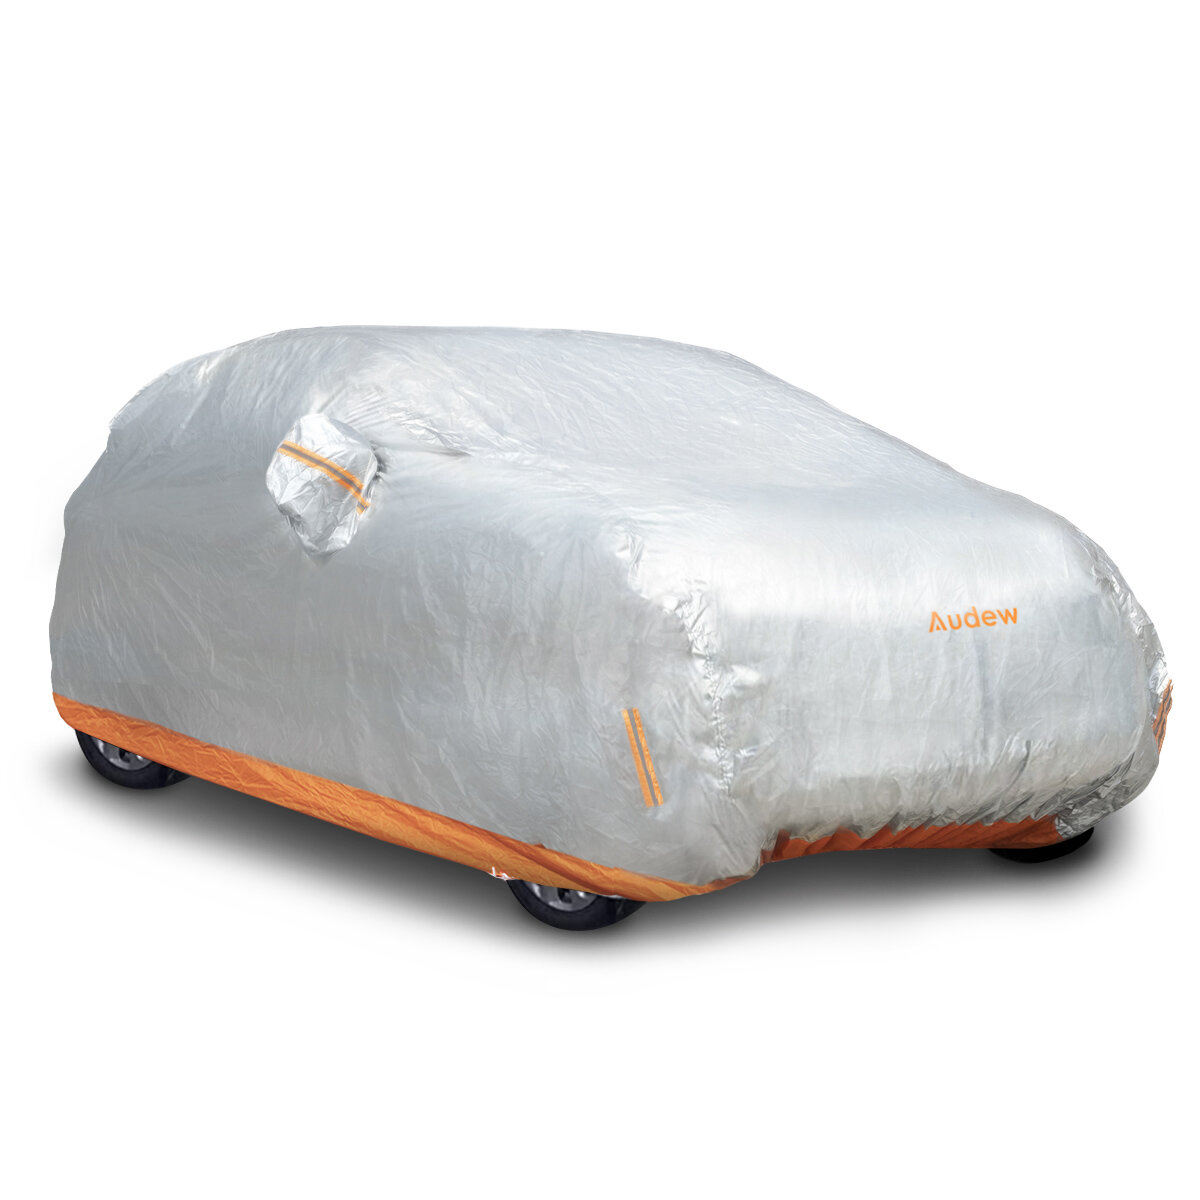 Image of M/L/XL Audew 210D Oxford Fabric Car Cover Waterproof Tarp For All Weather Protection Adjustable Straps & Reflective Stri